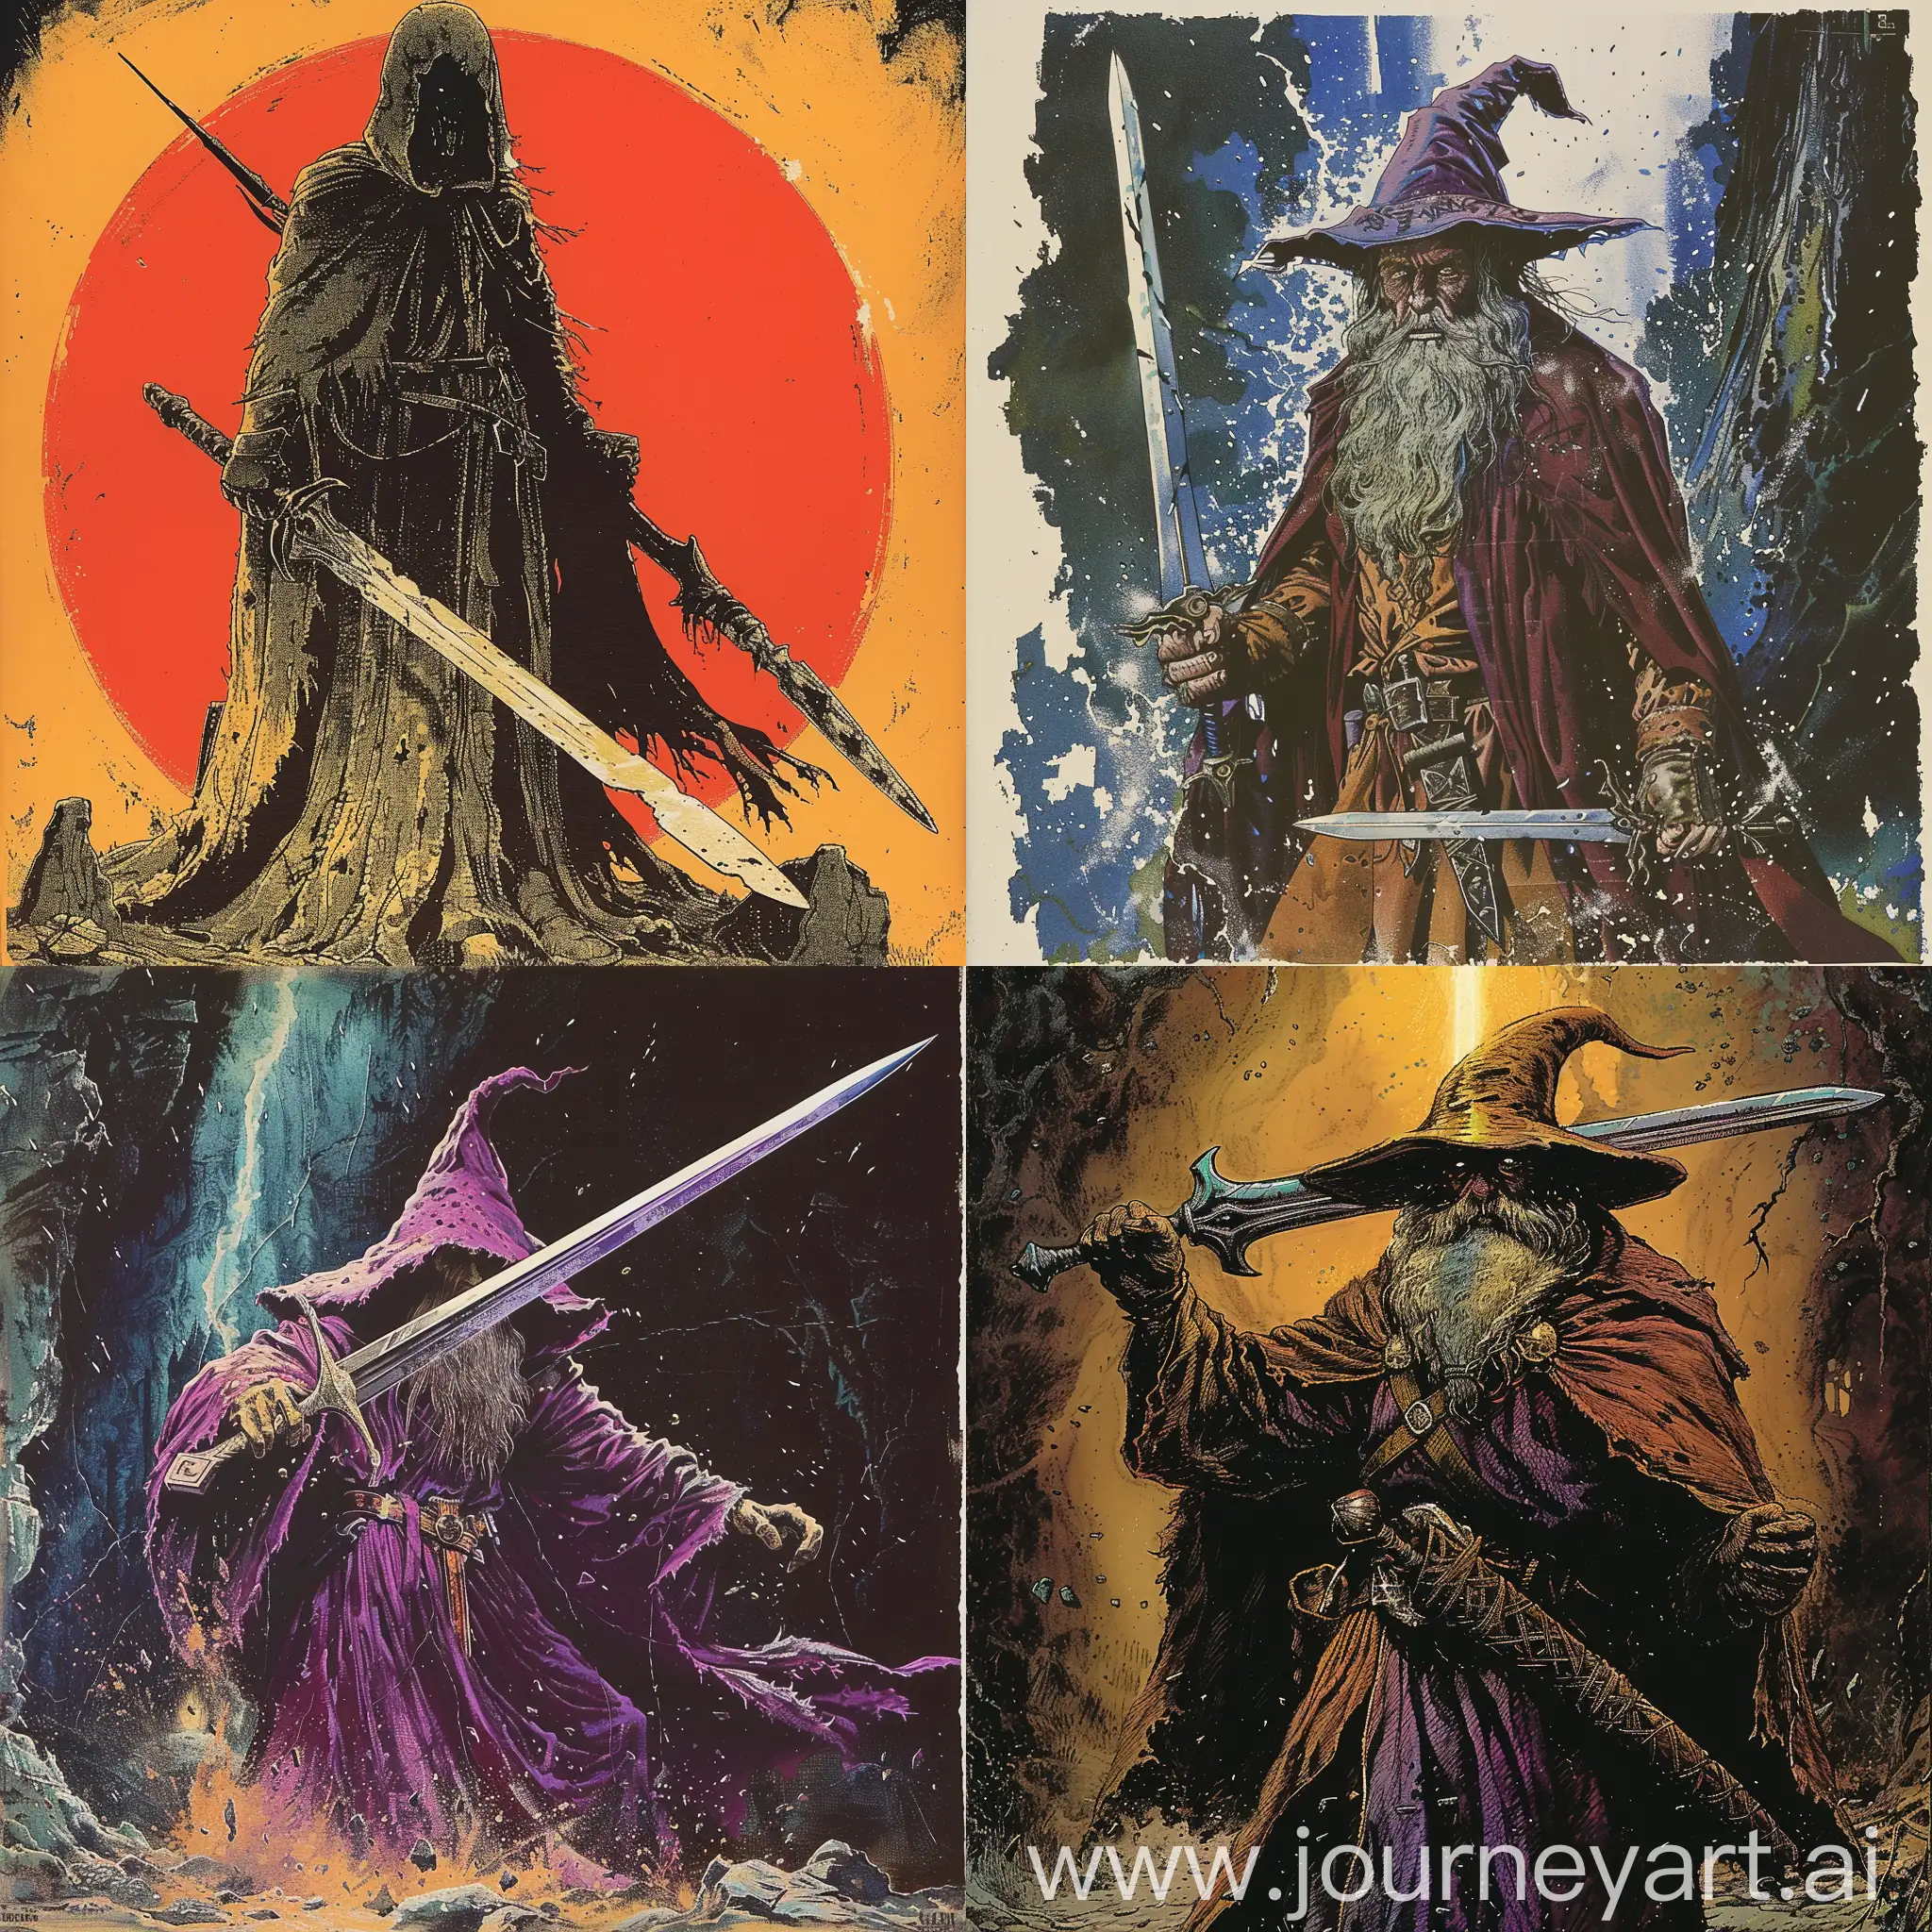 1970’s dark fantasy book cover paper art dungeons and dragons style drawing of Sword wielding wizard